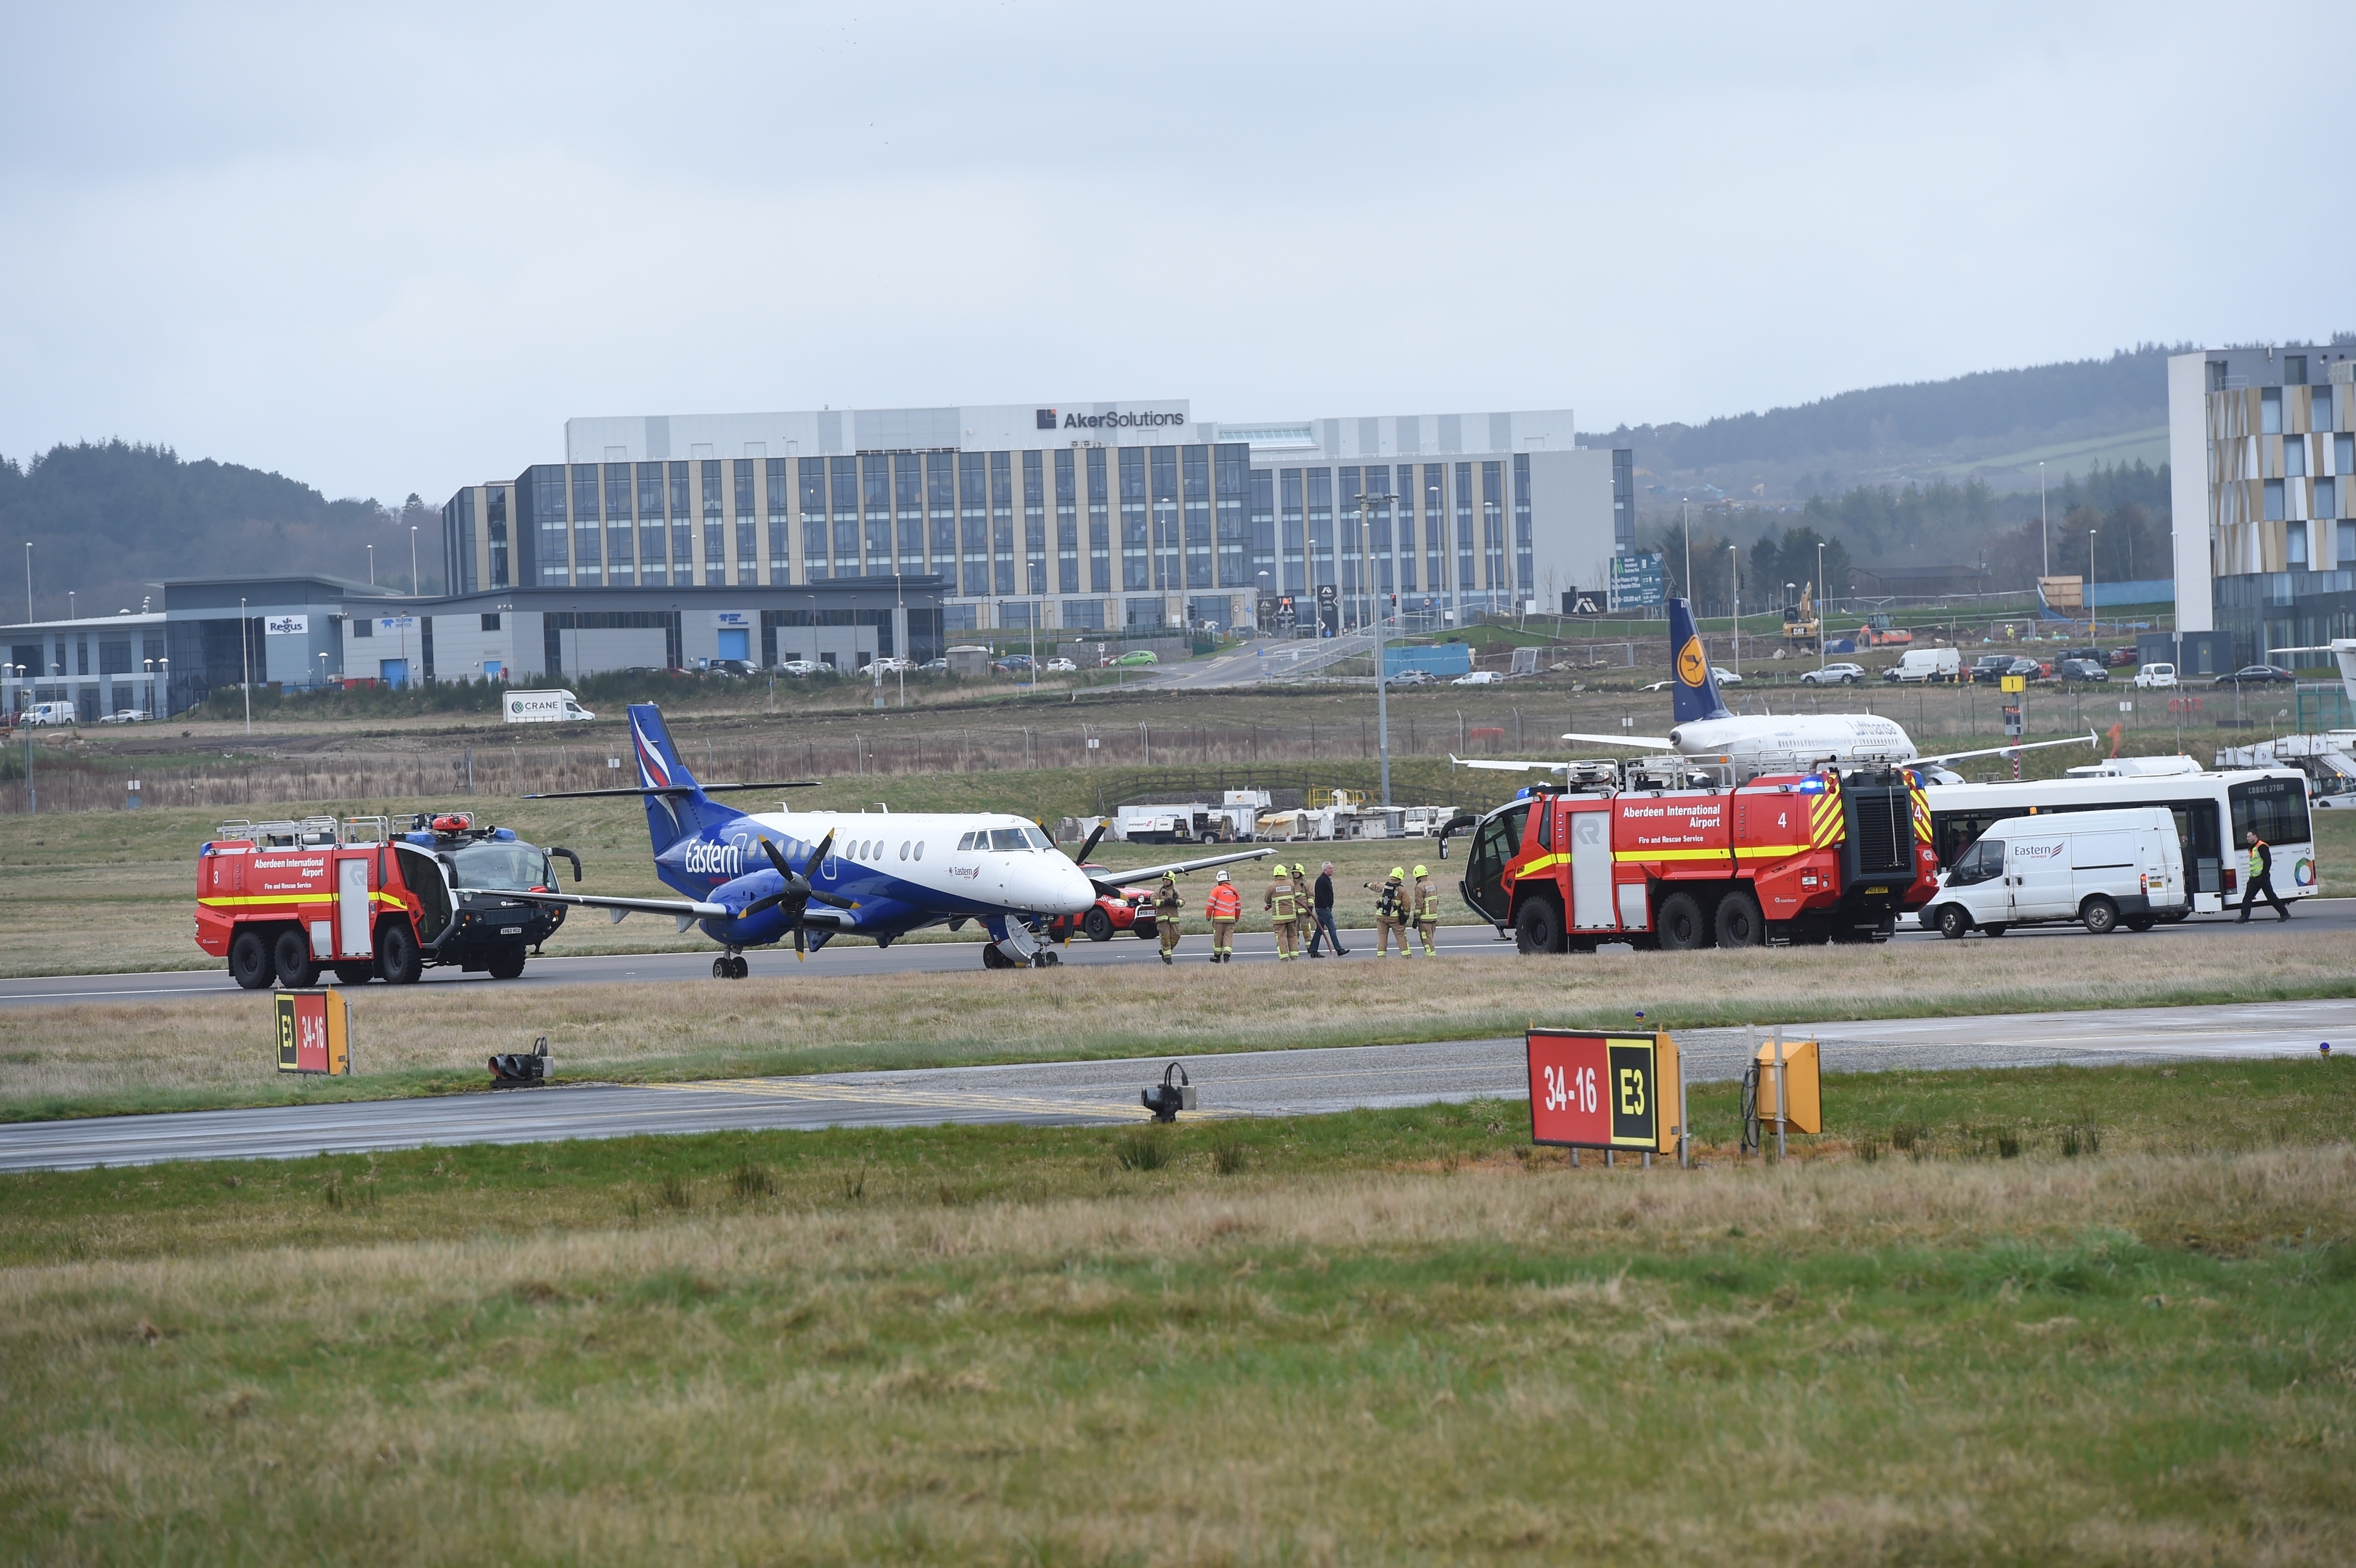 Emergency services alongside the plane at Aberdeen Airport